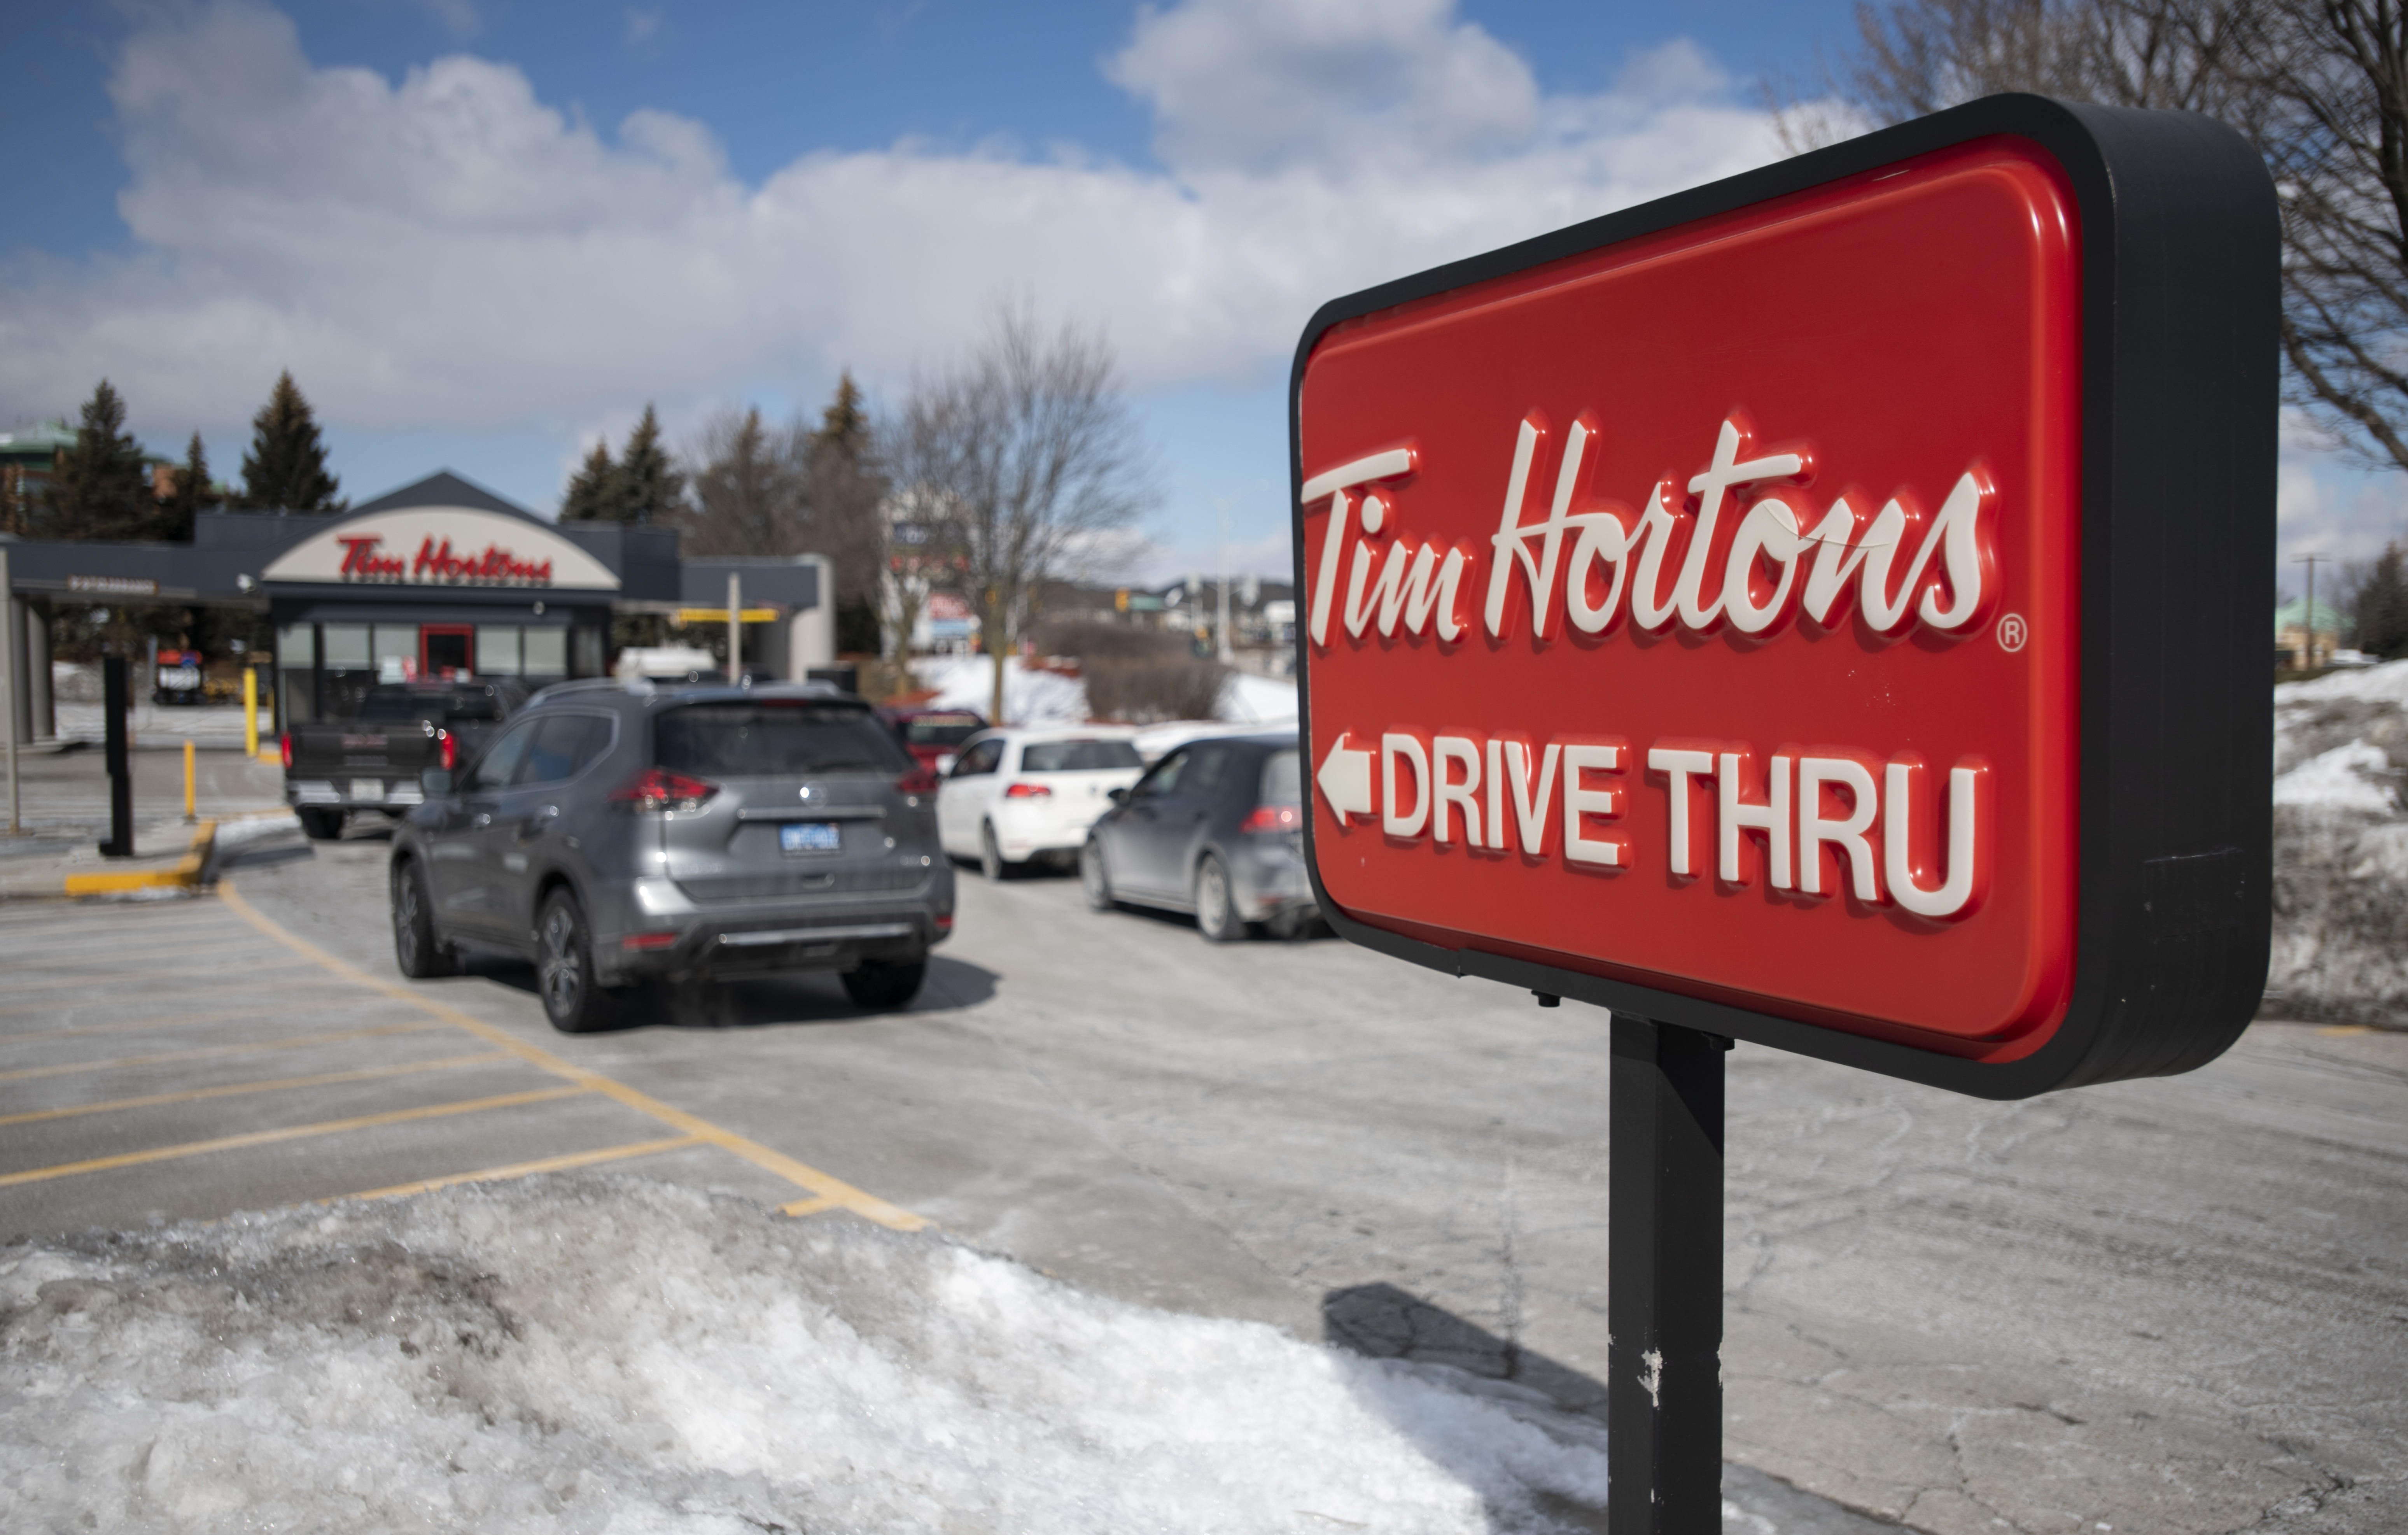 Tim Hortons a bright spot for RBI as it misses sales expectations, stock  falls